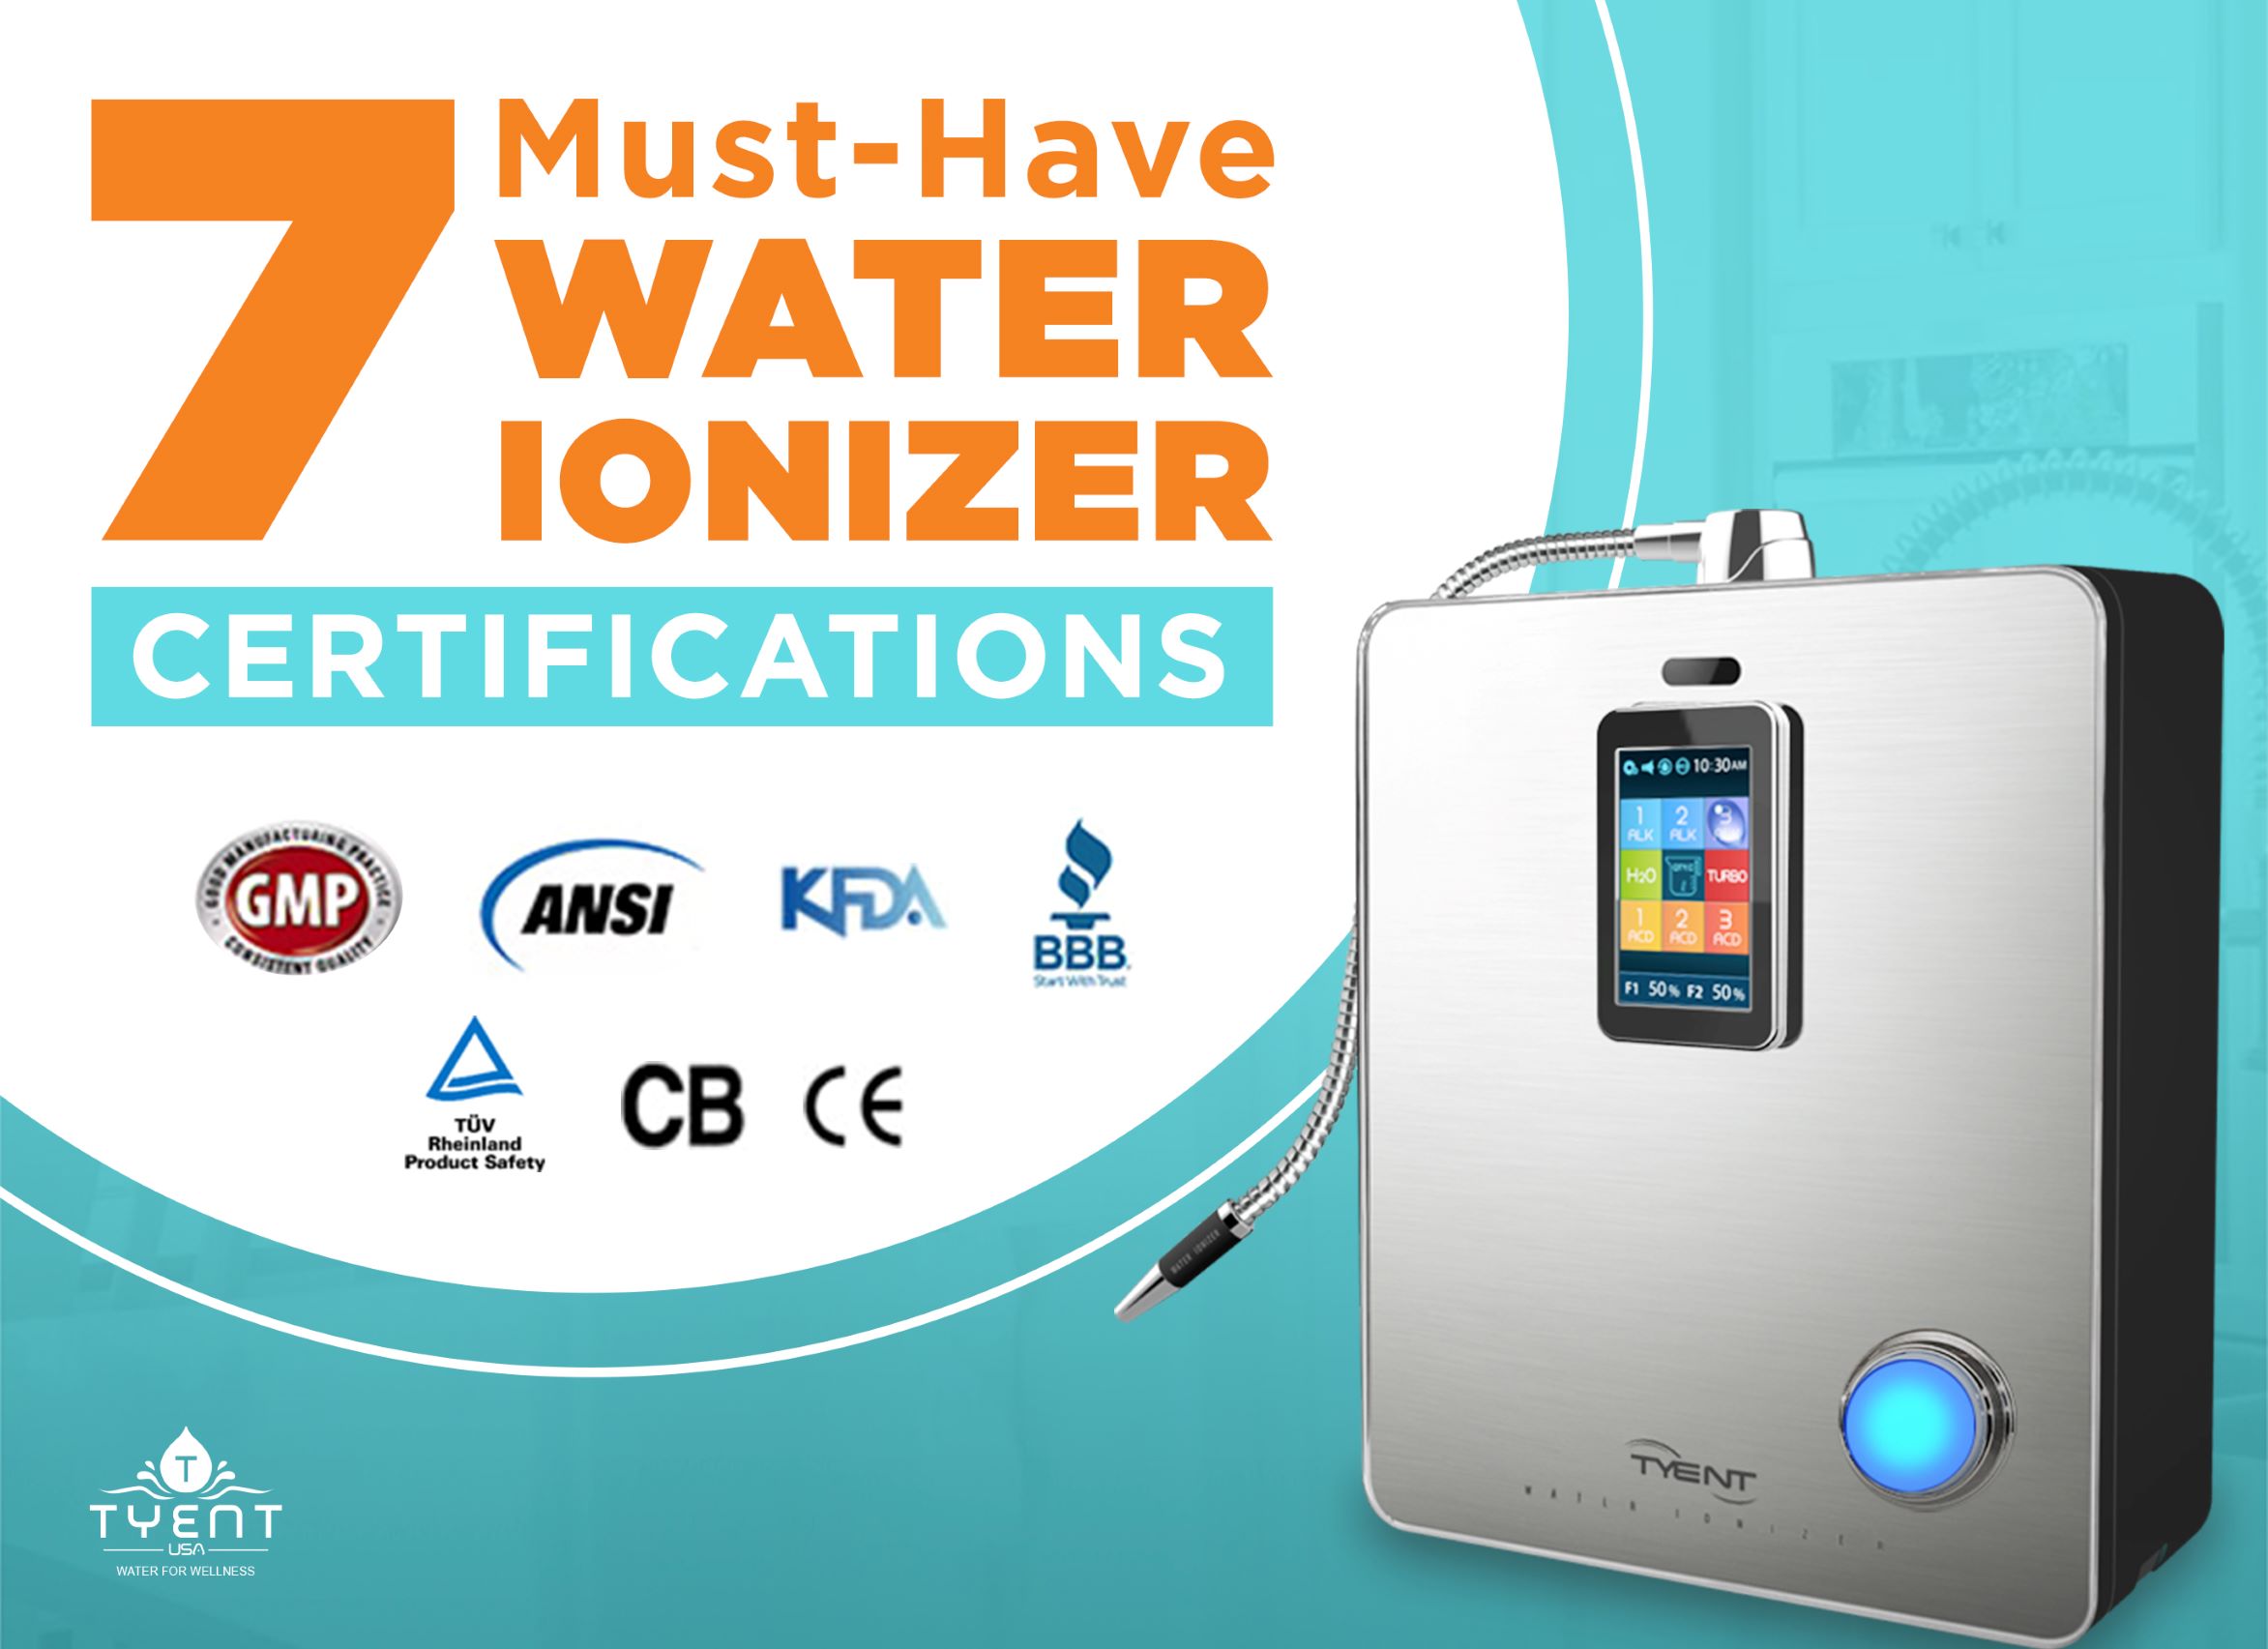 7 Must-Have Water Ionizer Certifications